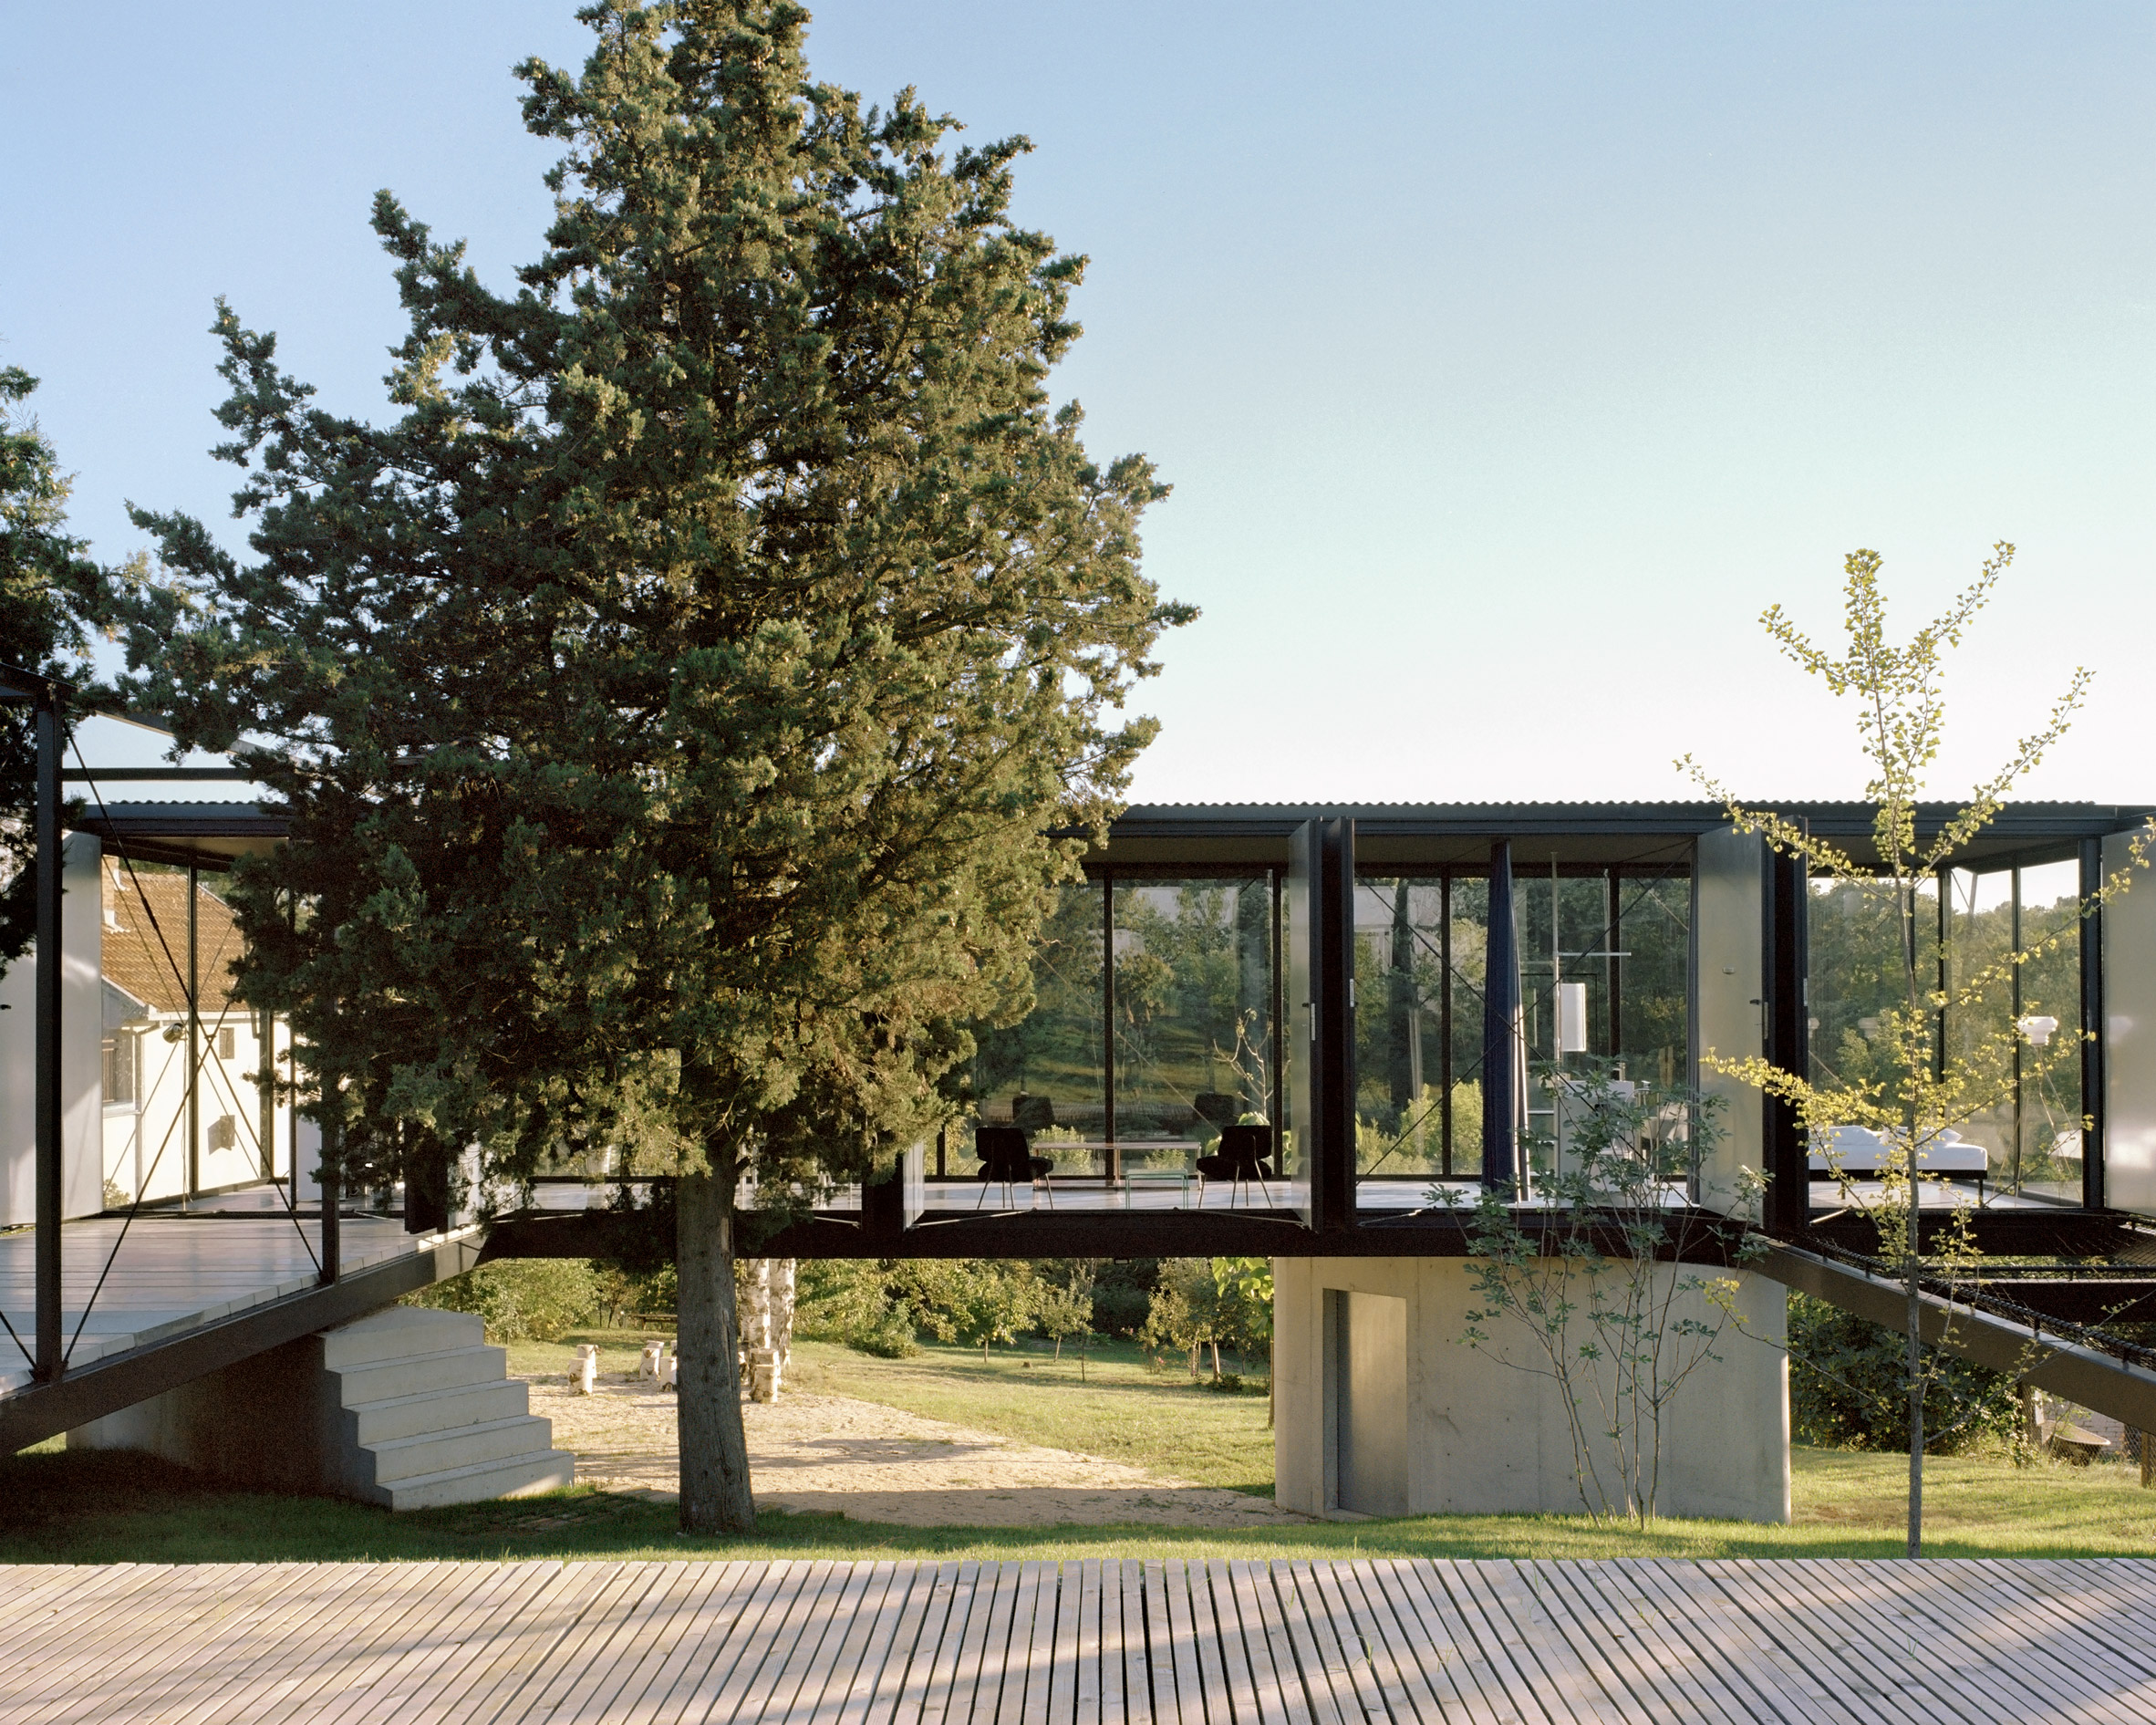 A steel-framed house with a central courtyard